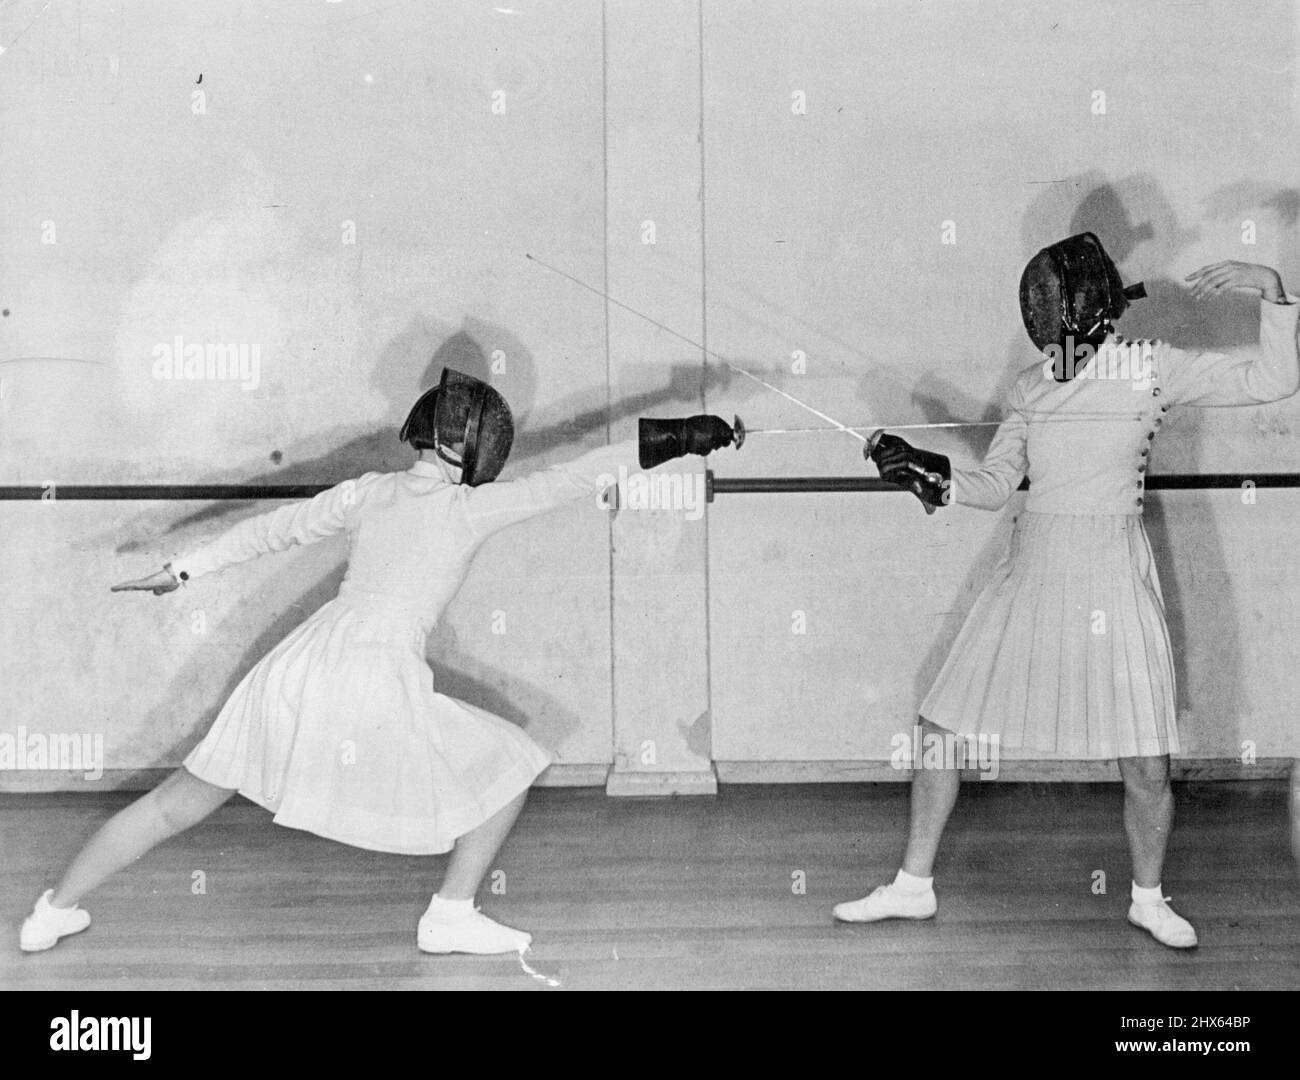 Lunge and Parry of Quatre. Hands and arms plays an important part in fencing They act as a tail does to a cat keeps the body in position. When the arms is thrown backward and downward it throws the body forward when the arm is brought up the body is bought quickly back to upright position. April 2, 1948. Stock Photo